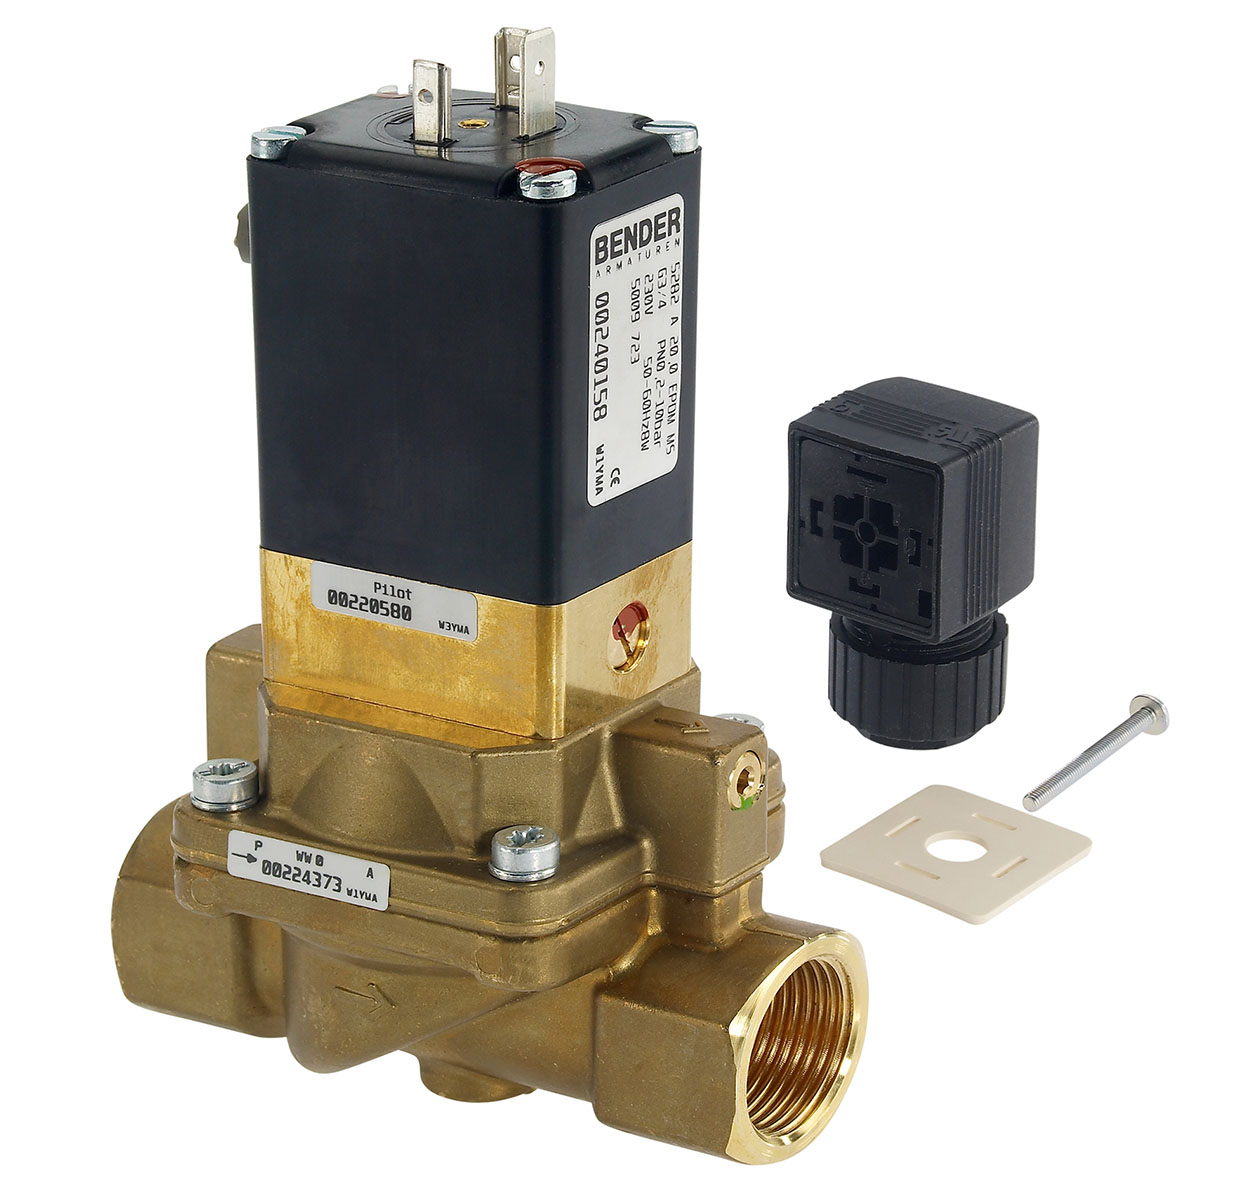 5009724 - 2/2 way solenoid valve normally closed for lightly soiled fluids Type 7; female thread